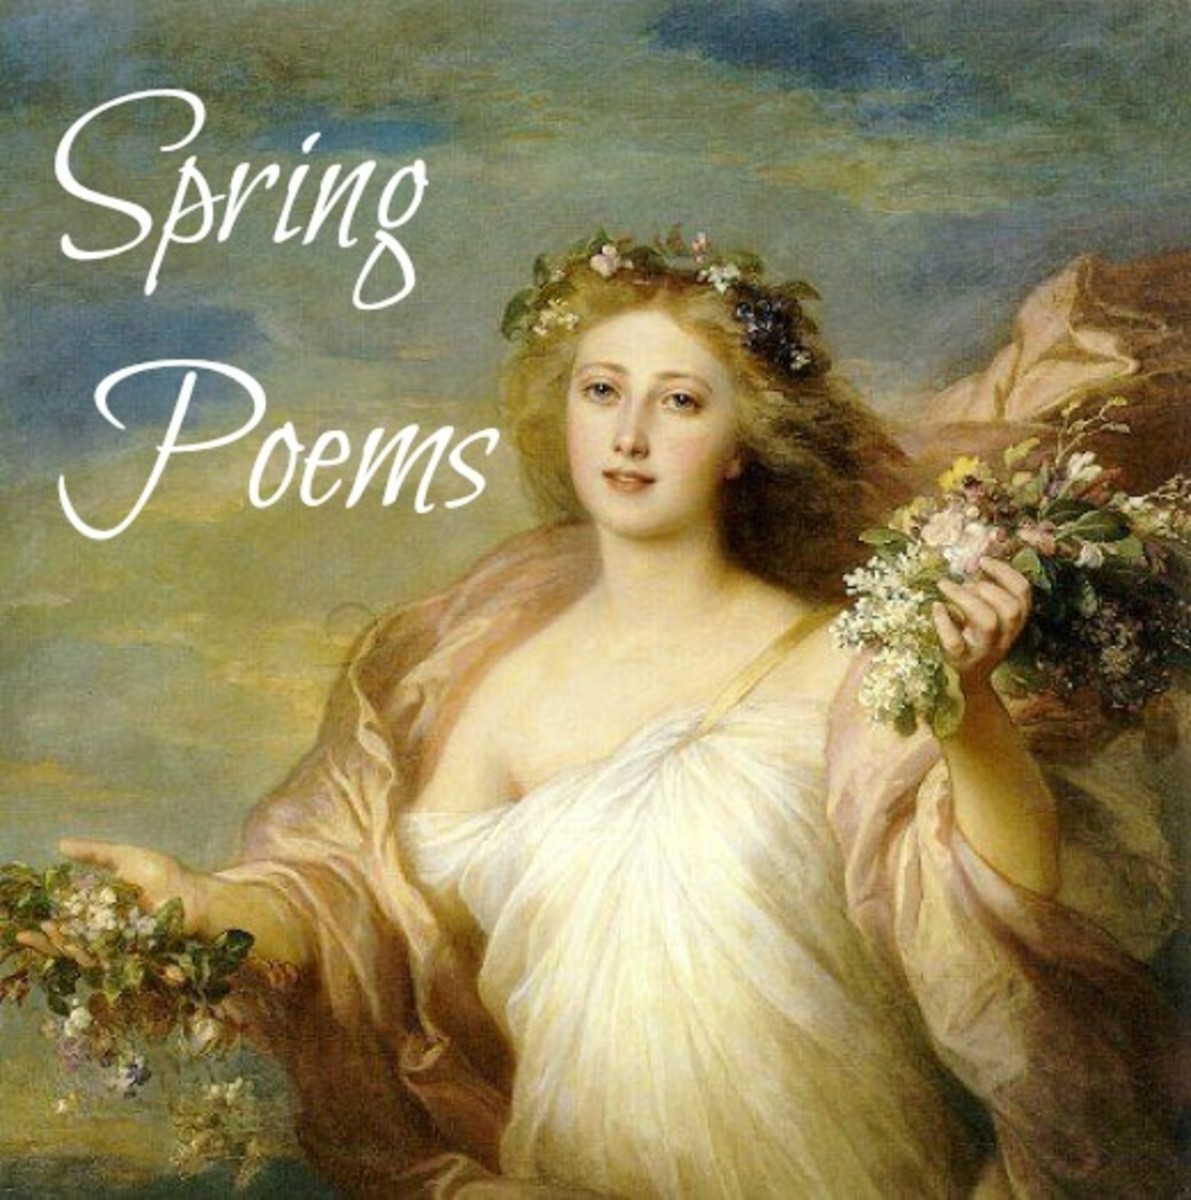 SPRING POEMS: 60 Best Spring Poems and Spring Poems for Kids